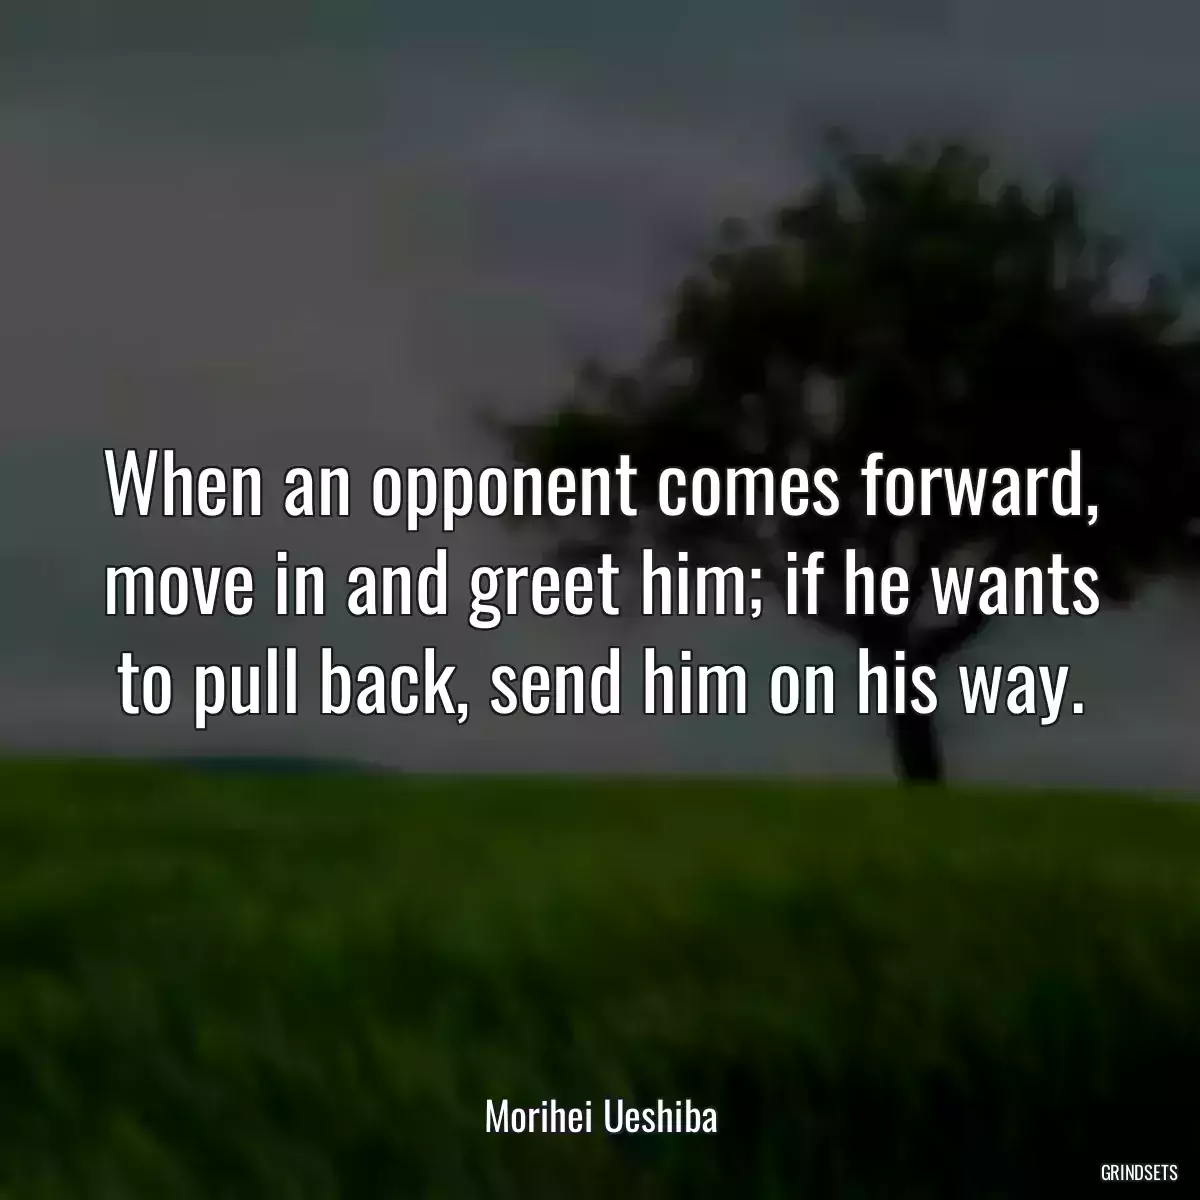 When an opponent comes forward, move in and greet him; if he wants to pull back, send him on his way.